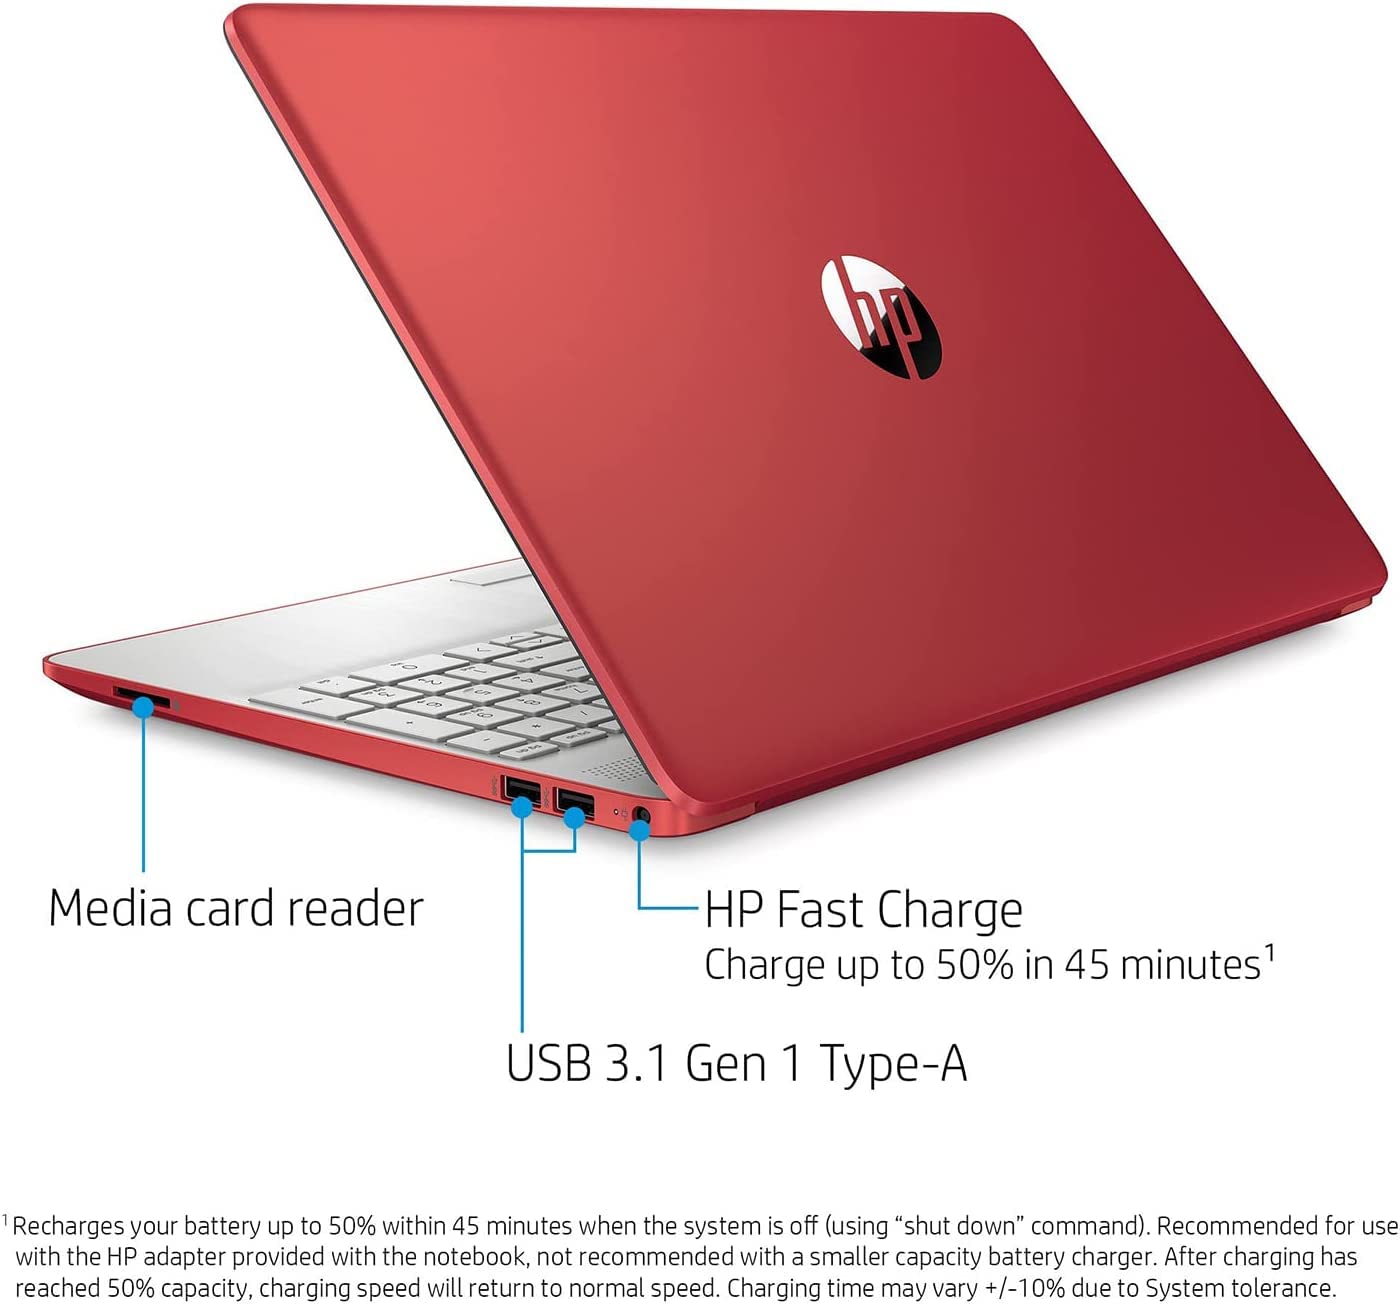 HP Newest Flagship 15.6 HD Pavilion Laptop for Business and Student, Intel Pentium Quad-Core Processor, 16GB RAM, 1TB SSD, Online Conferencing, Webcam, HDMI, Bluetooth, Fast Charge, Win11, Red, PCM